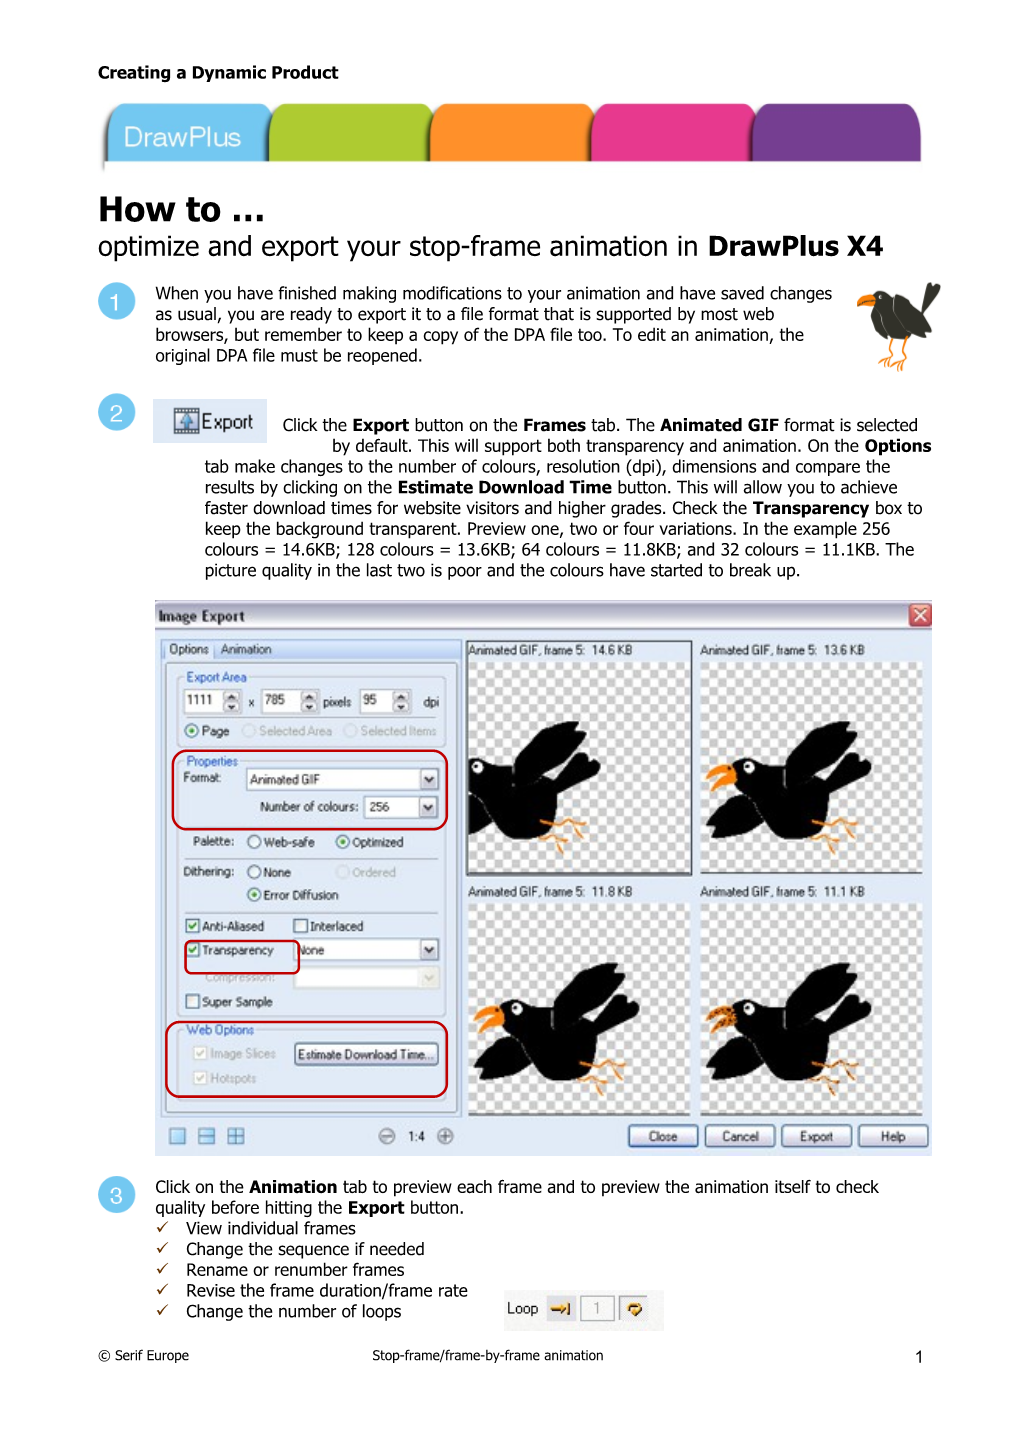 Optimize and Export Your Stop-Frame Animation in Drawplus X4